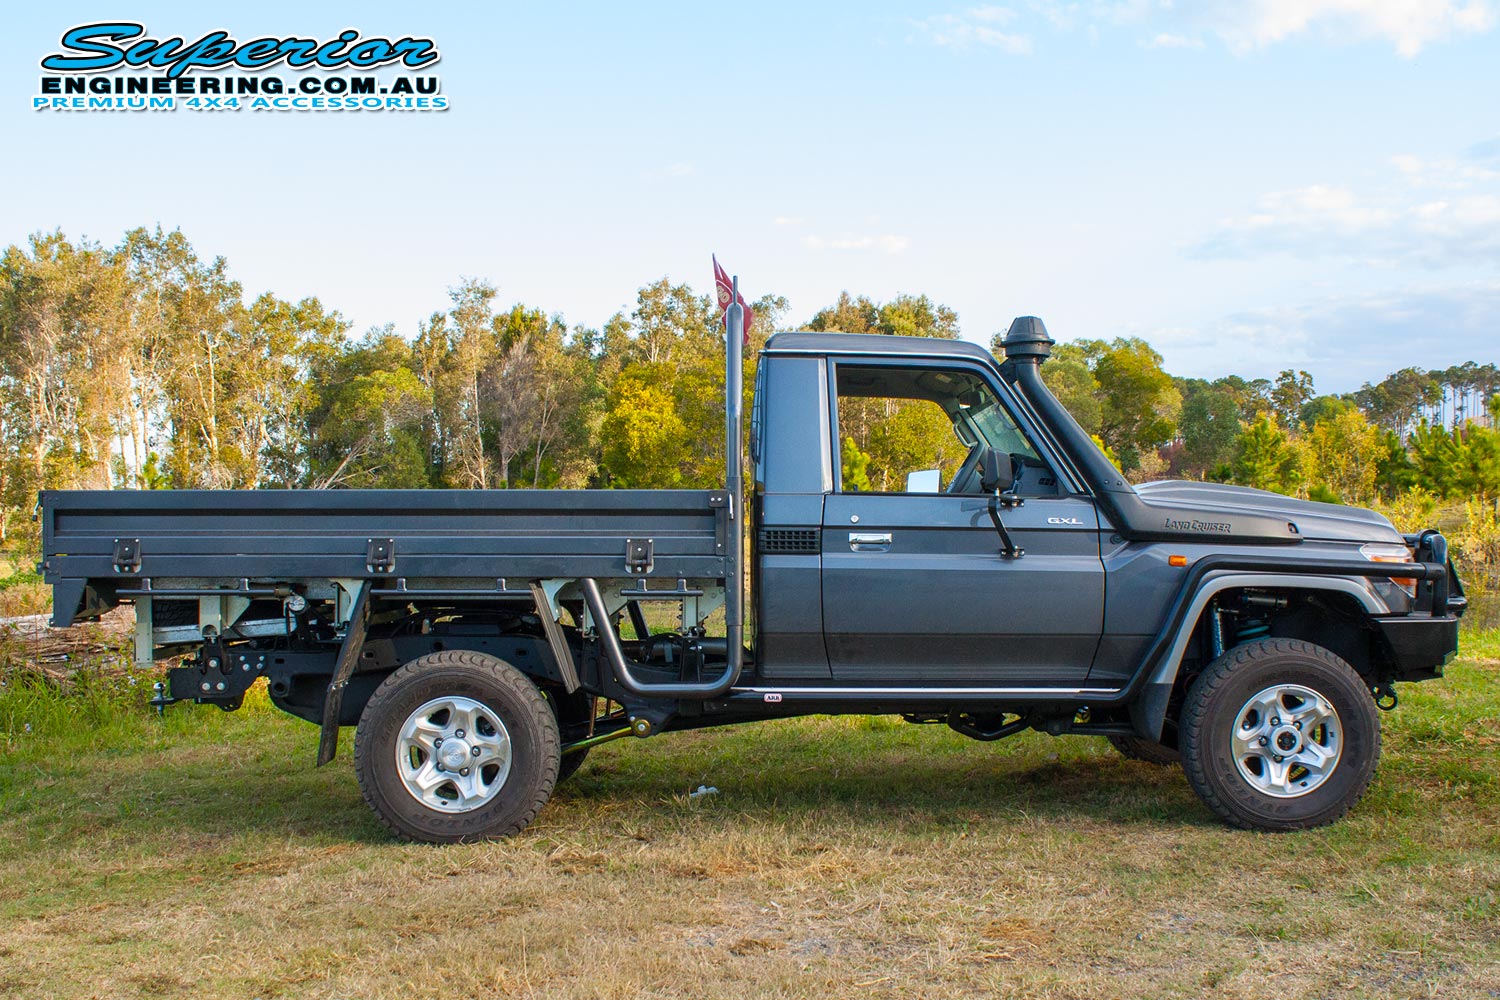 Right side view of a 79 Series Toyota Landcruiser fitted out with a full rear coil conversion kit and rear track width correction system